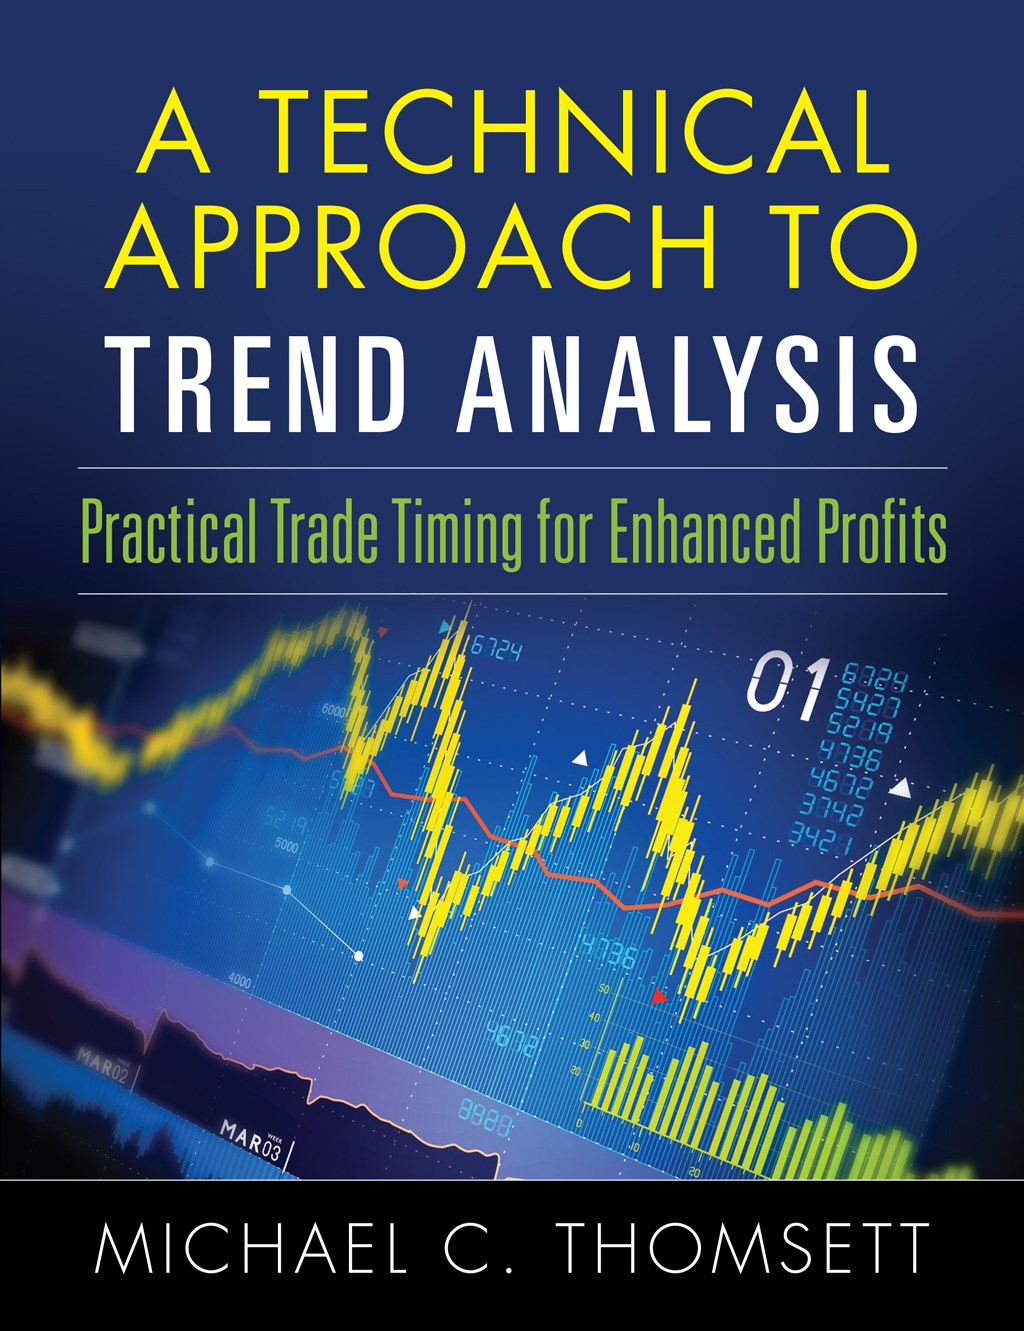 Technical Approach To Trend Analysis, A: Practical Trade Timing for Enhanced Profits